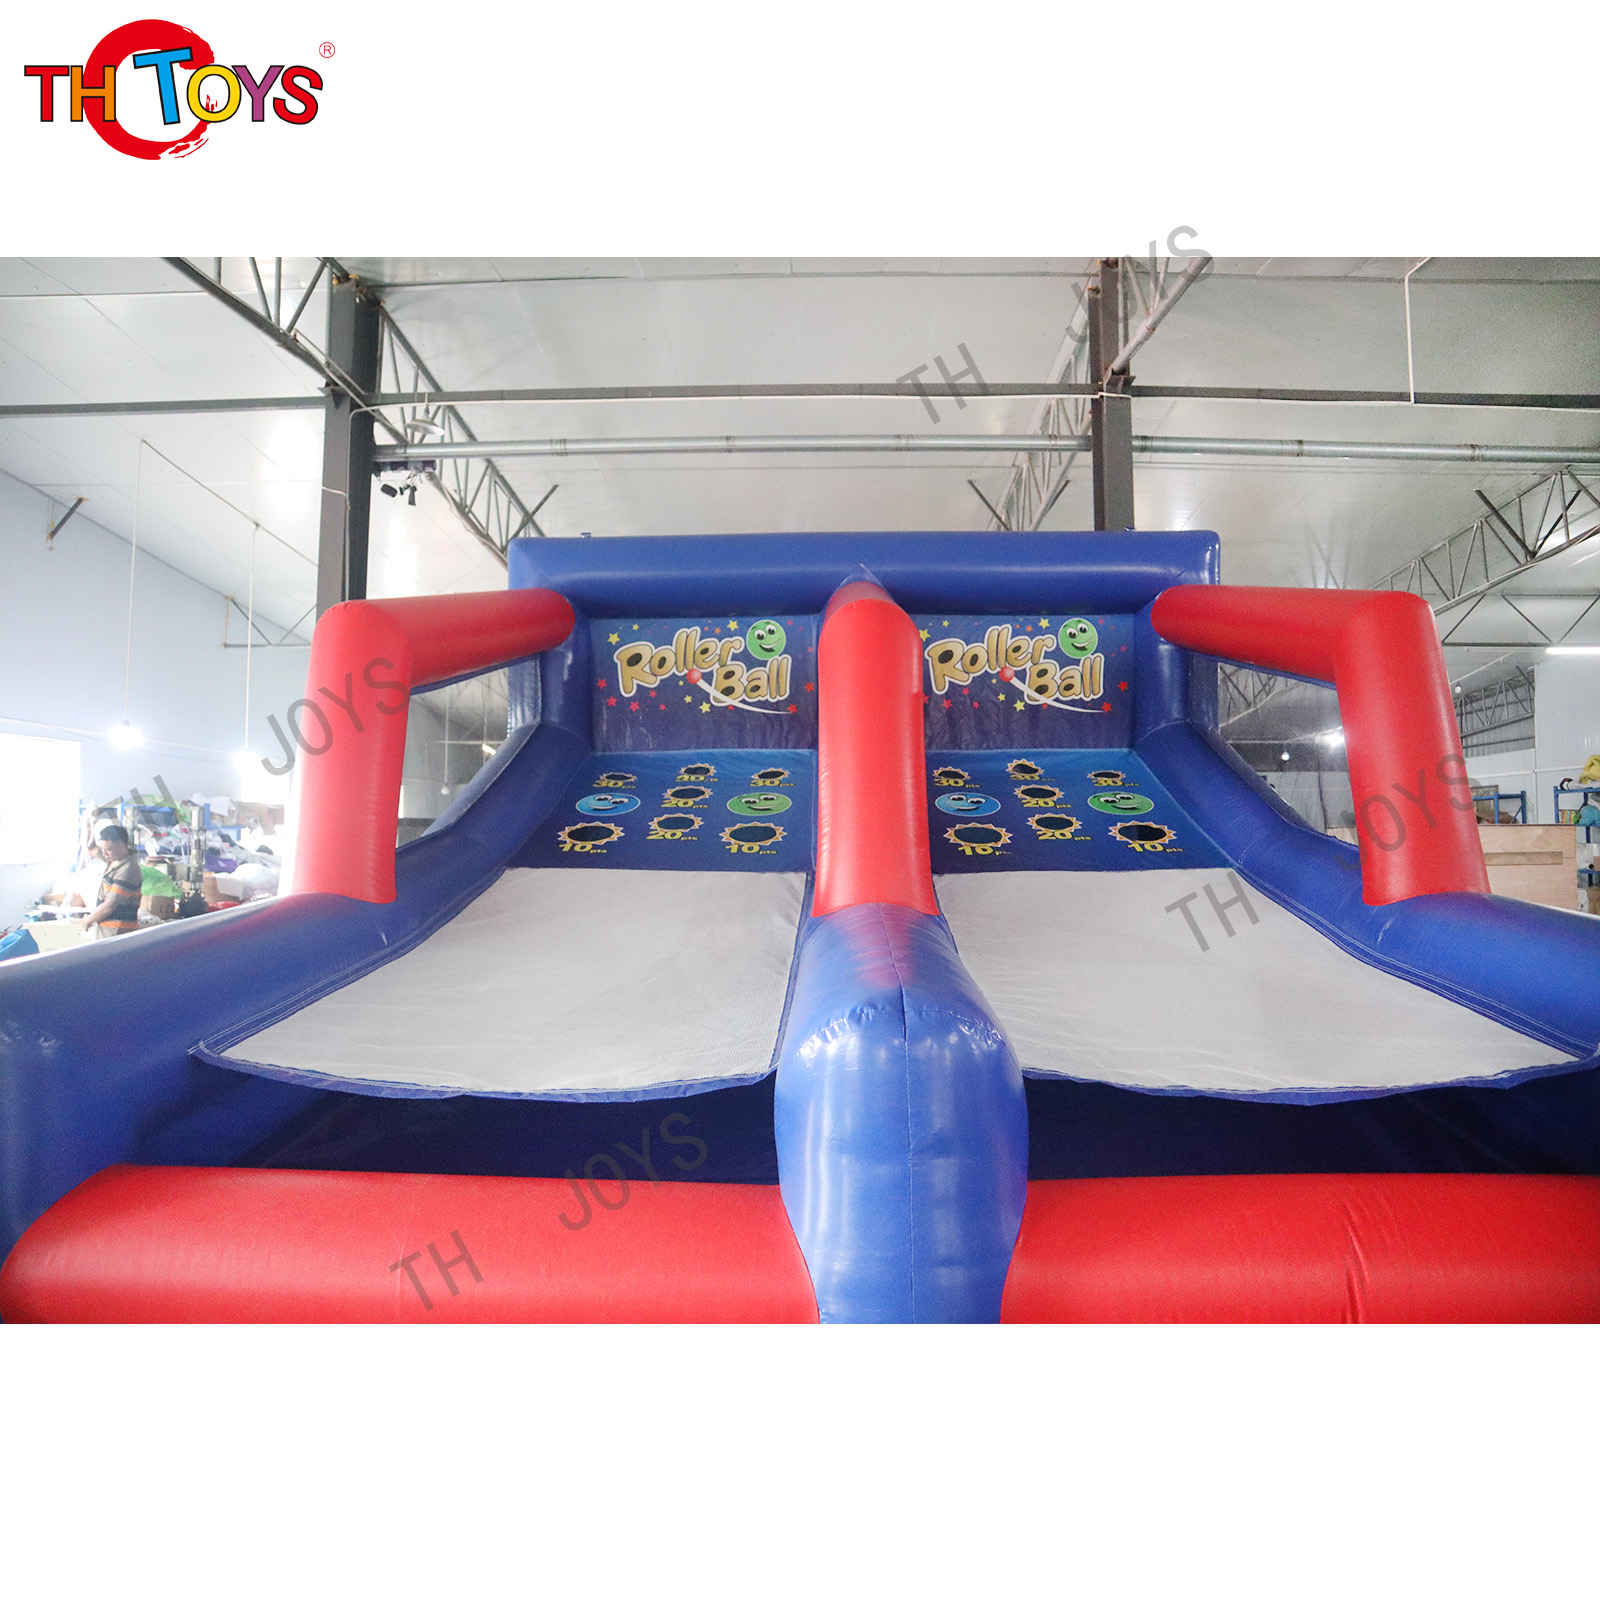 Carnival Interactive Games 2 Lanes Inflatable Roller Ball 2 Player Inflatable Game Comes Skee Tennis Balls Ball